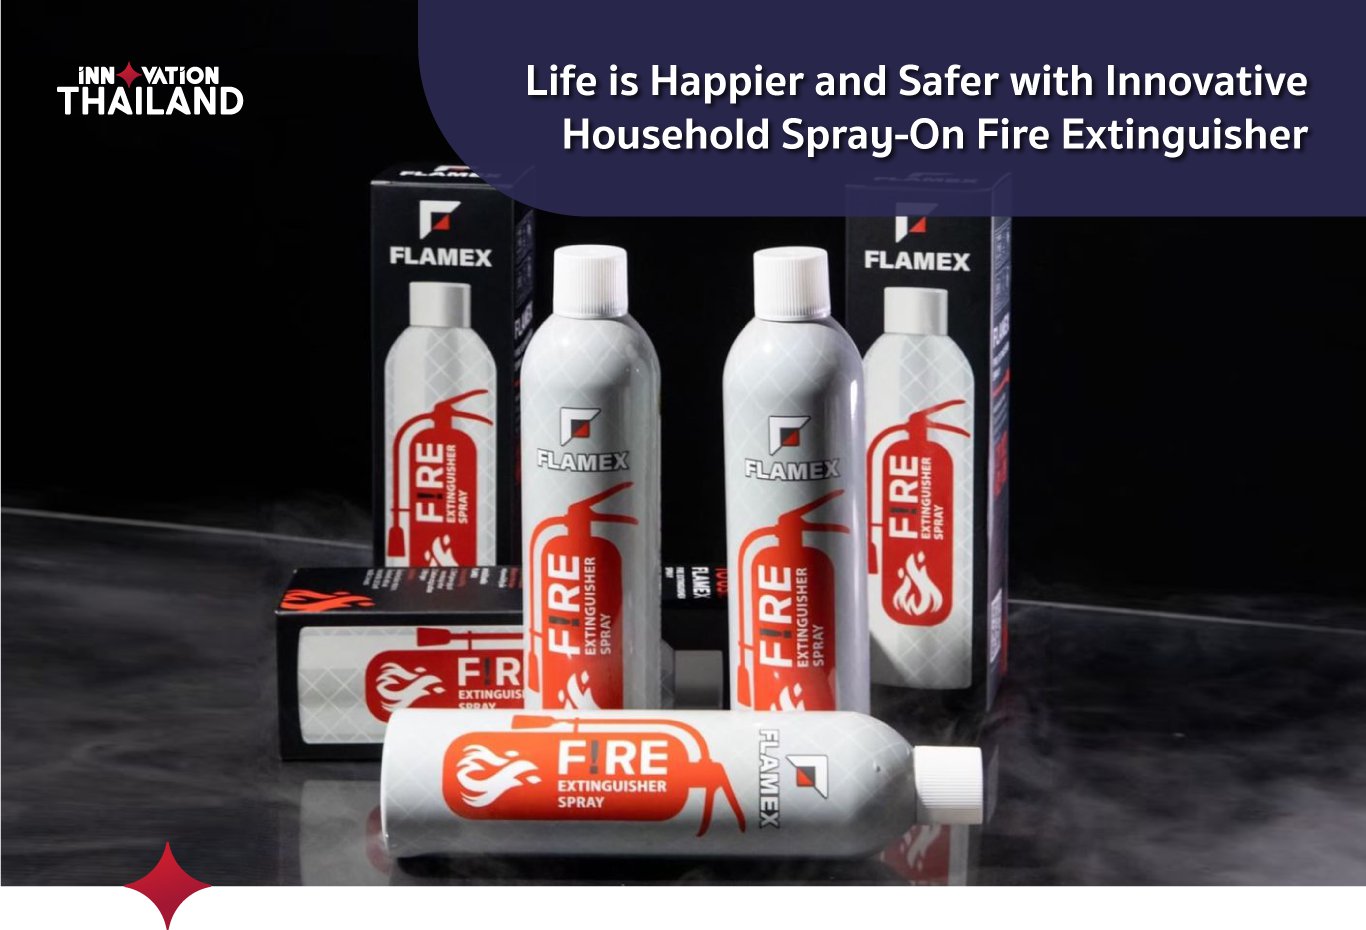 Life is Happier and Safer with Innovative Household Spray-On Fire Extinguisher